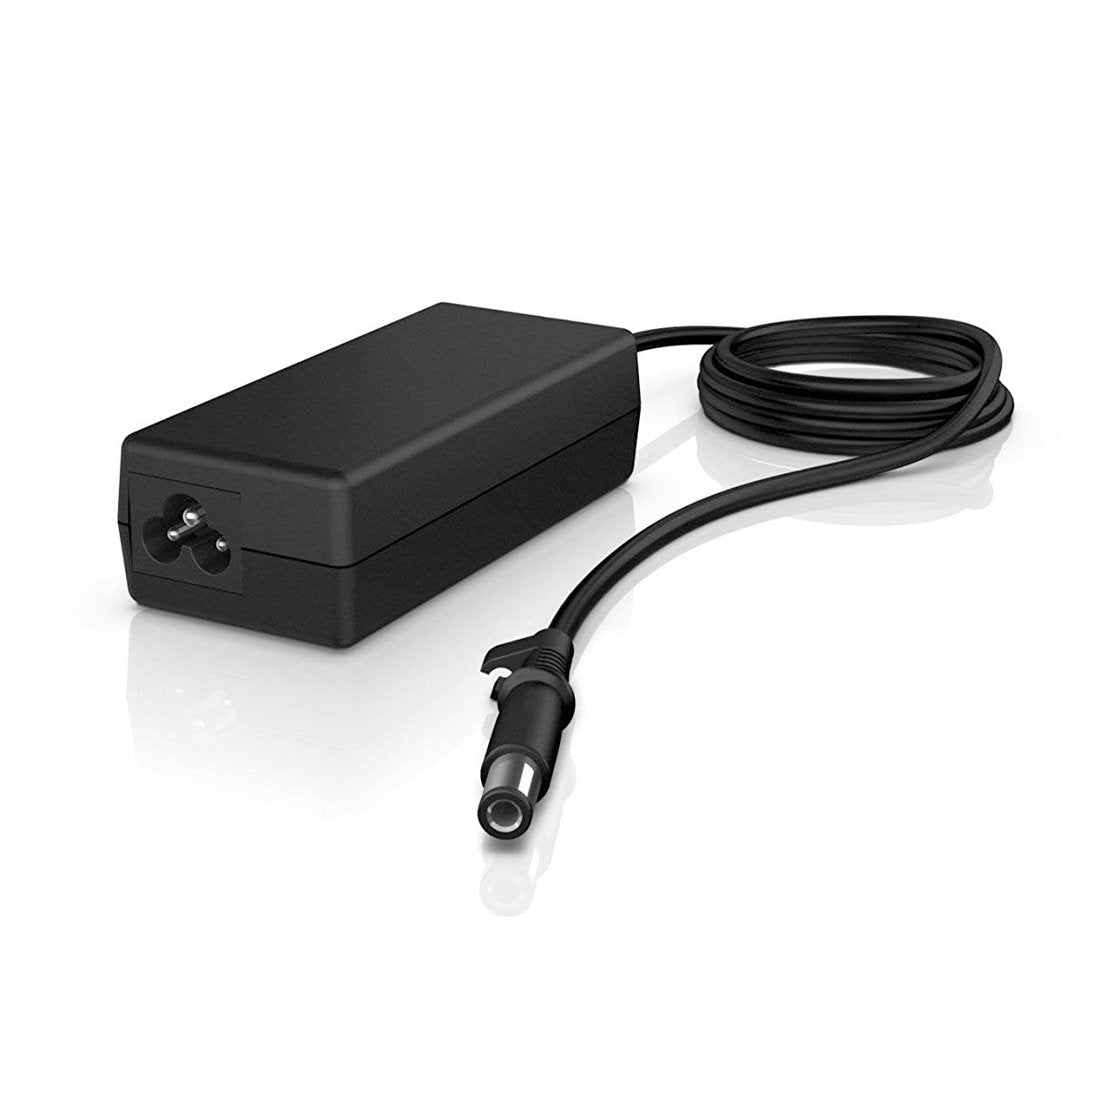 HP 65W Laptop Adapter From The Peripheral Store